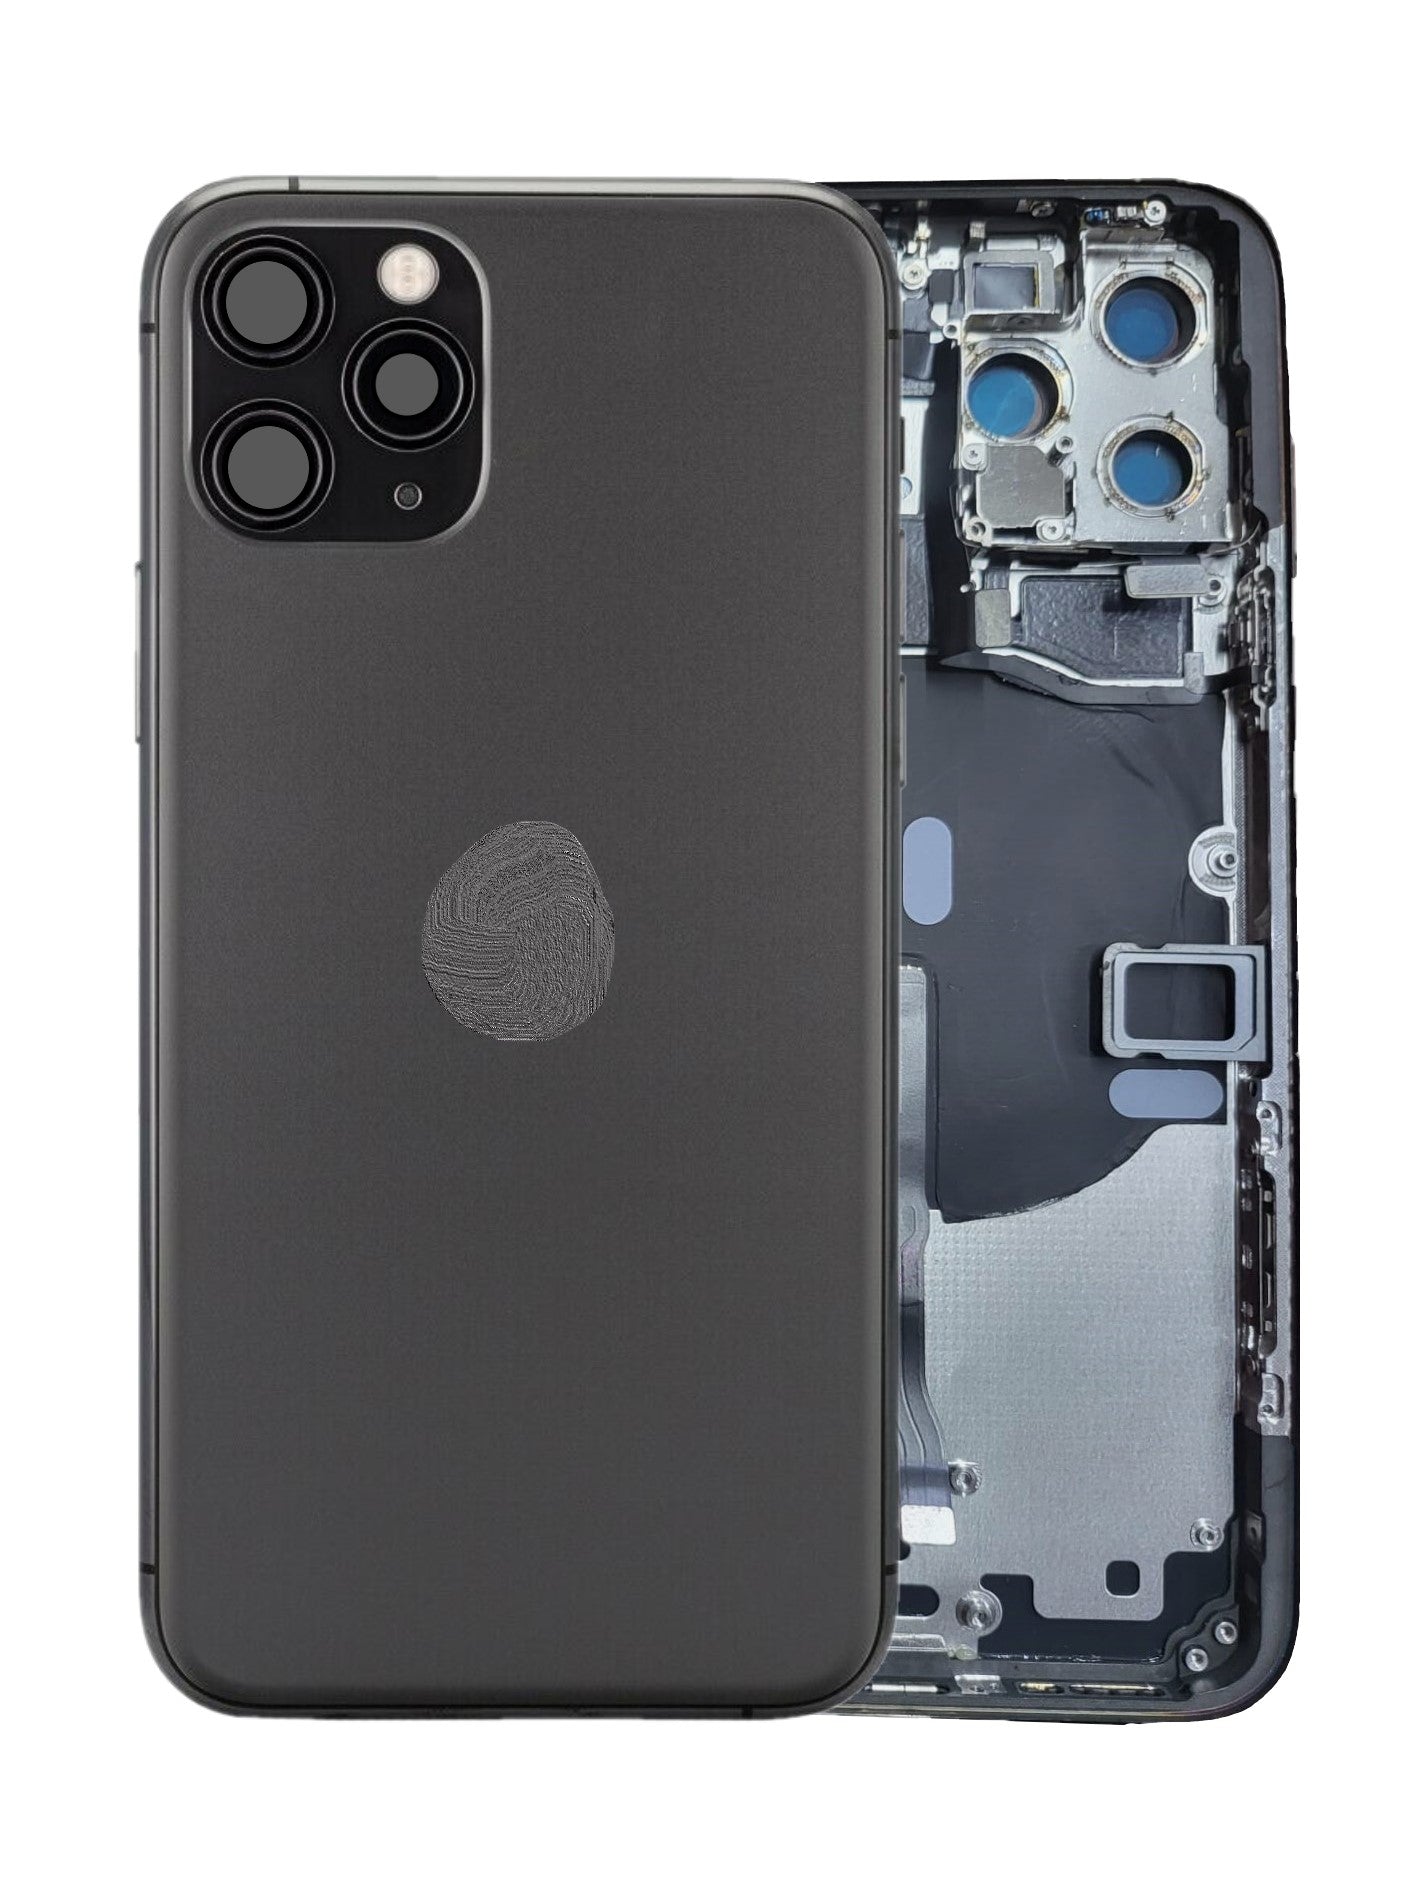 Back Housing W/ Small Components Pre-Installed For iPhone 11 Pro ( OEM Pulled Grade A )